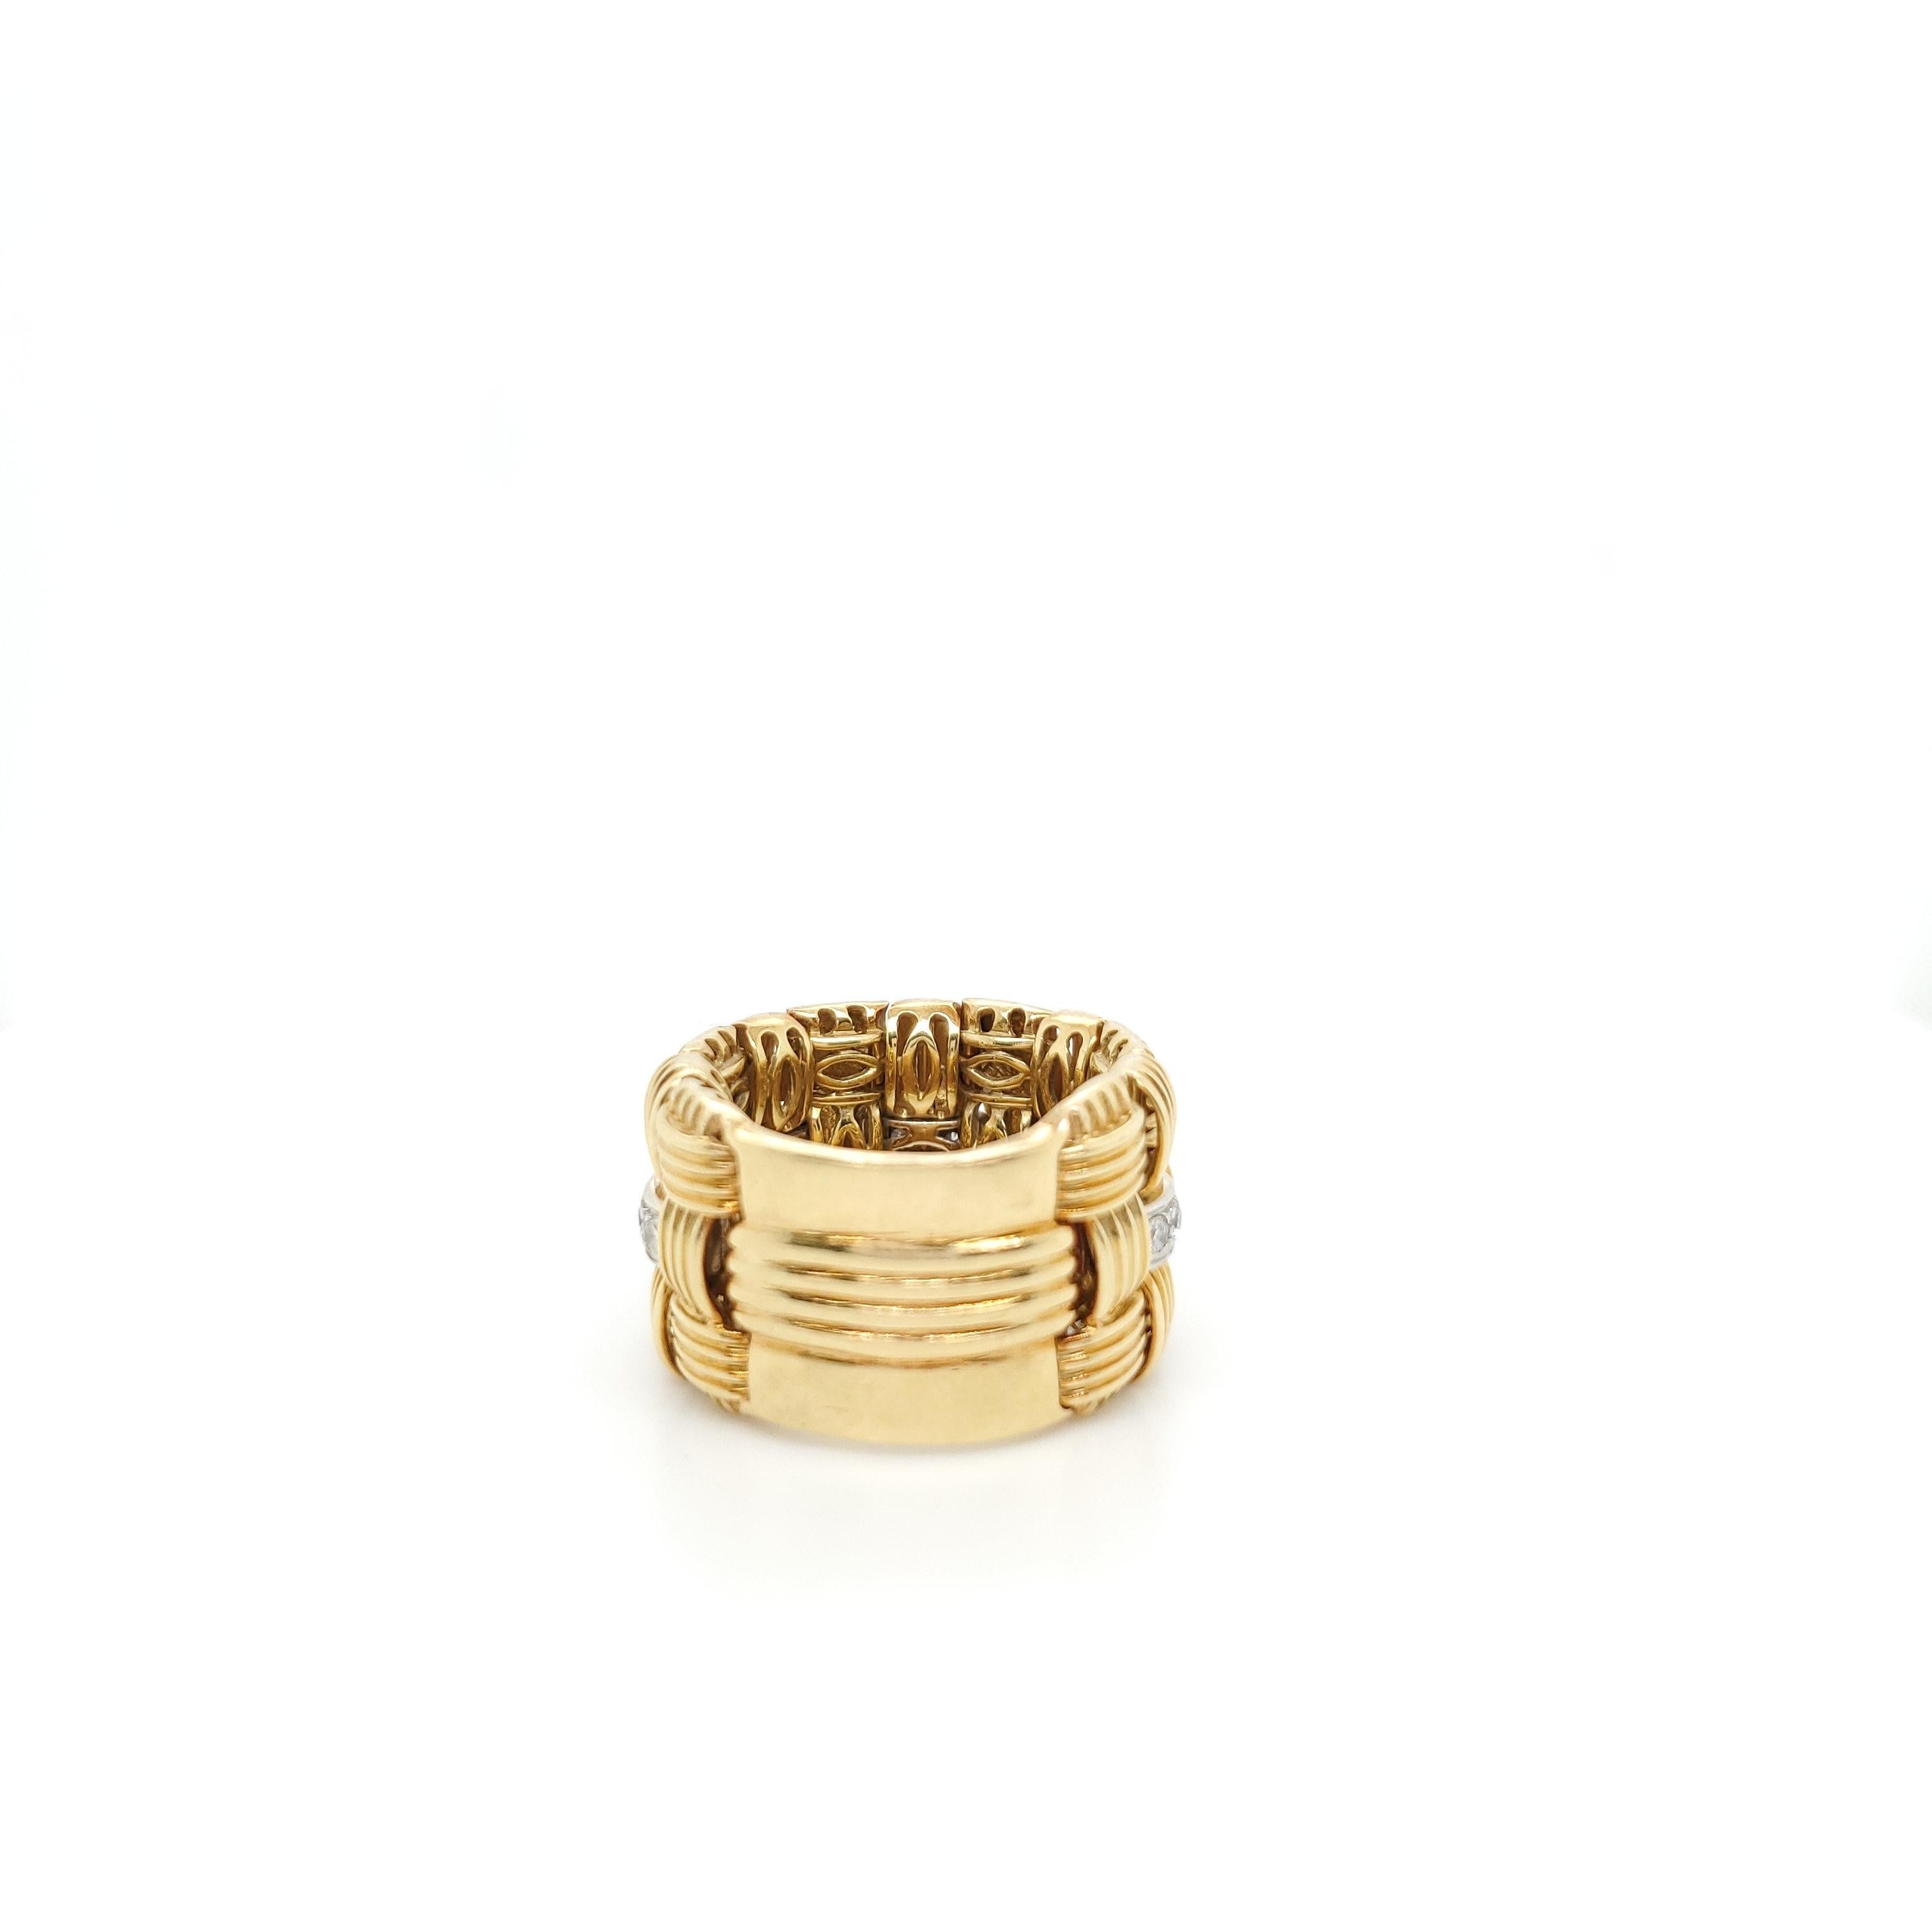 Authentic Roberto Coin 18 karat yellow gold flexible three-row woven look ring with diamonds from the Appassionata collection. The round brilliant cut diamonds (F-G in color, VS-SI clarity) estimated at 0.15 carats total are set in 18 karat white